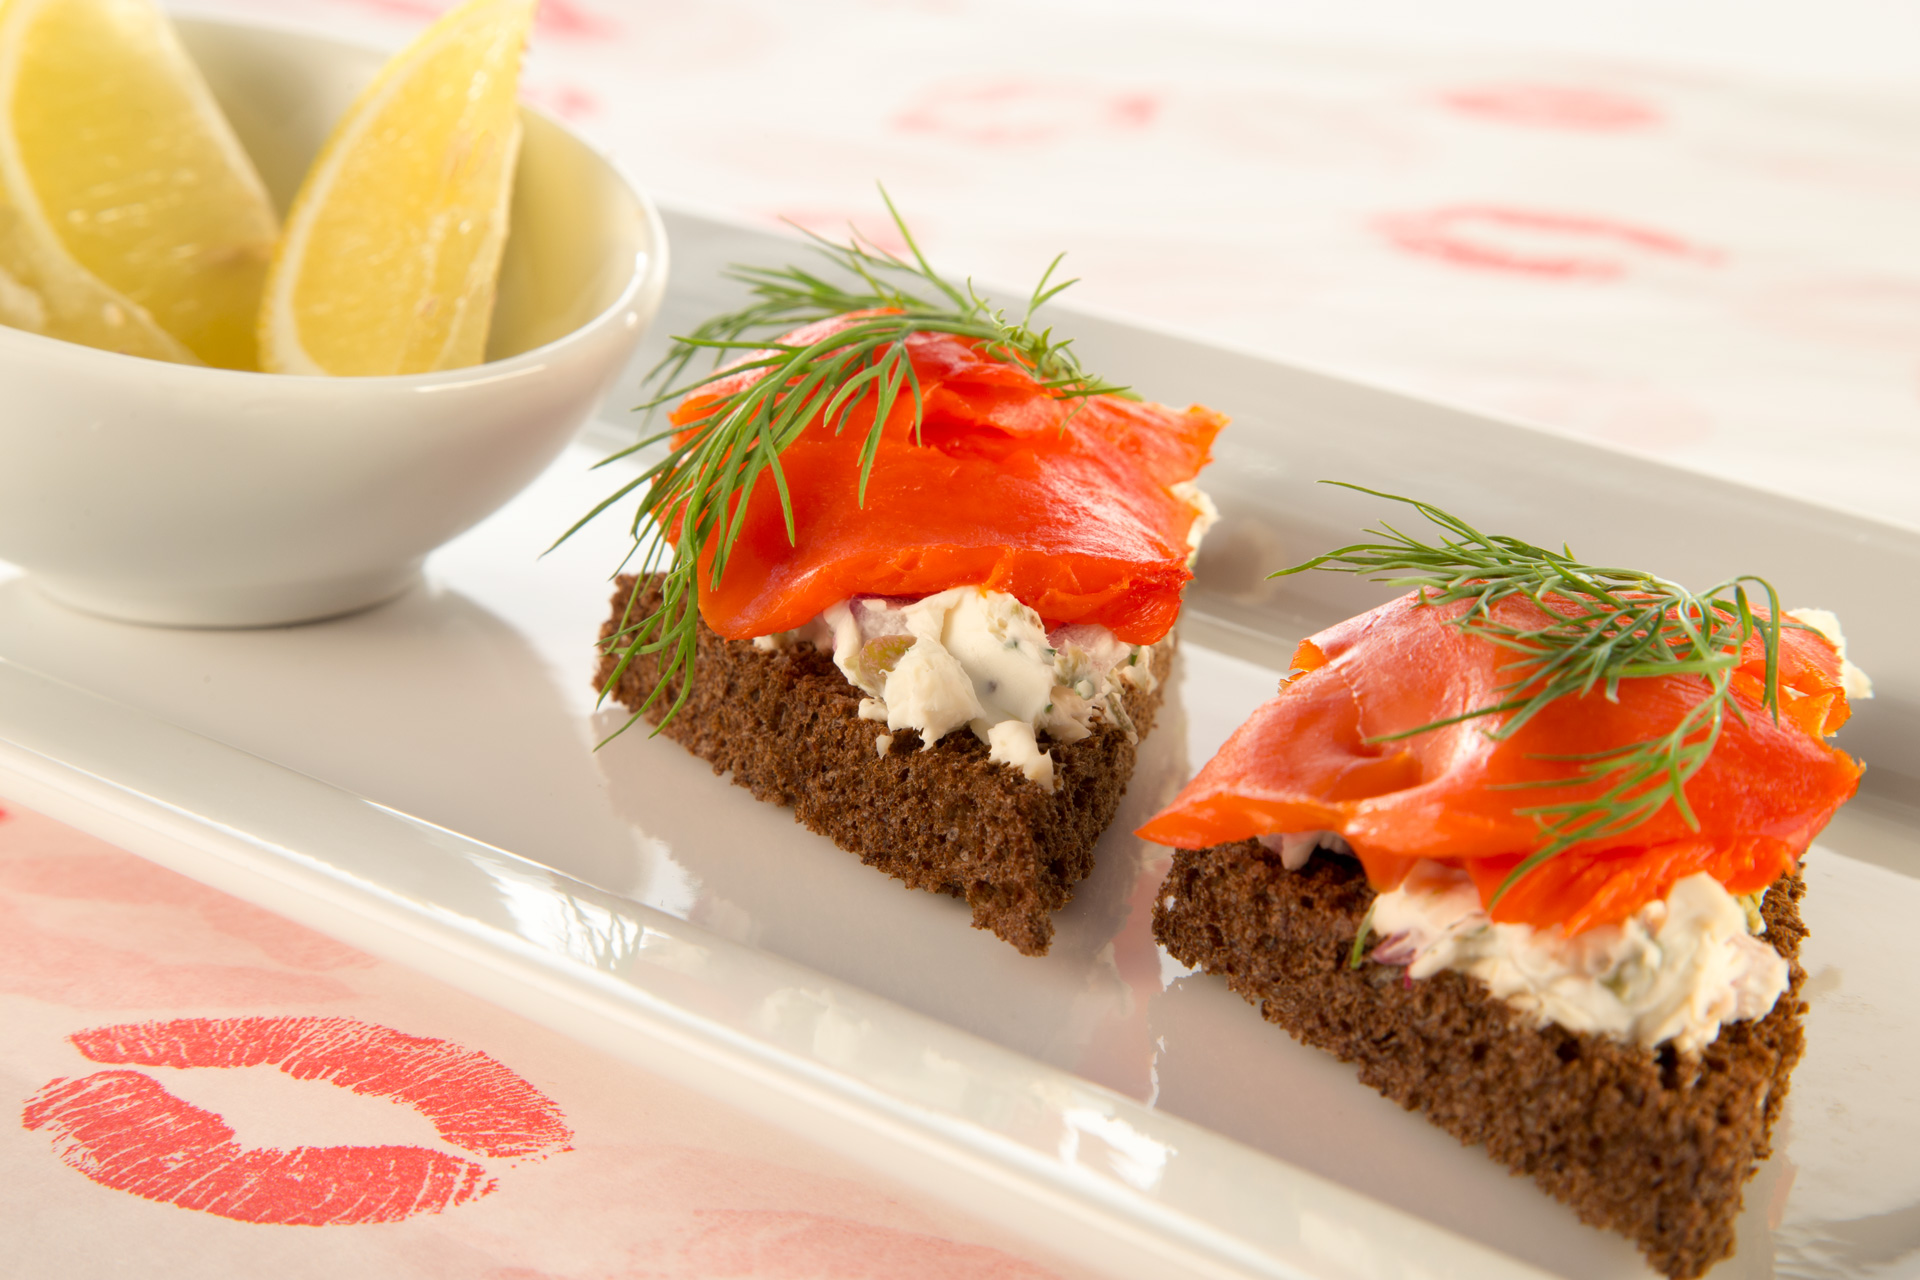 This smoked salmon dish–otherwise known as lox on pumpernickel–offers a classic combination of cream cheese, capers, red onions and smoked salmon. The perfect Valentine's Day appetizer!